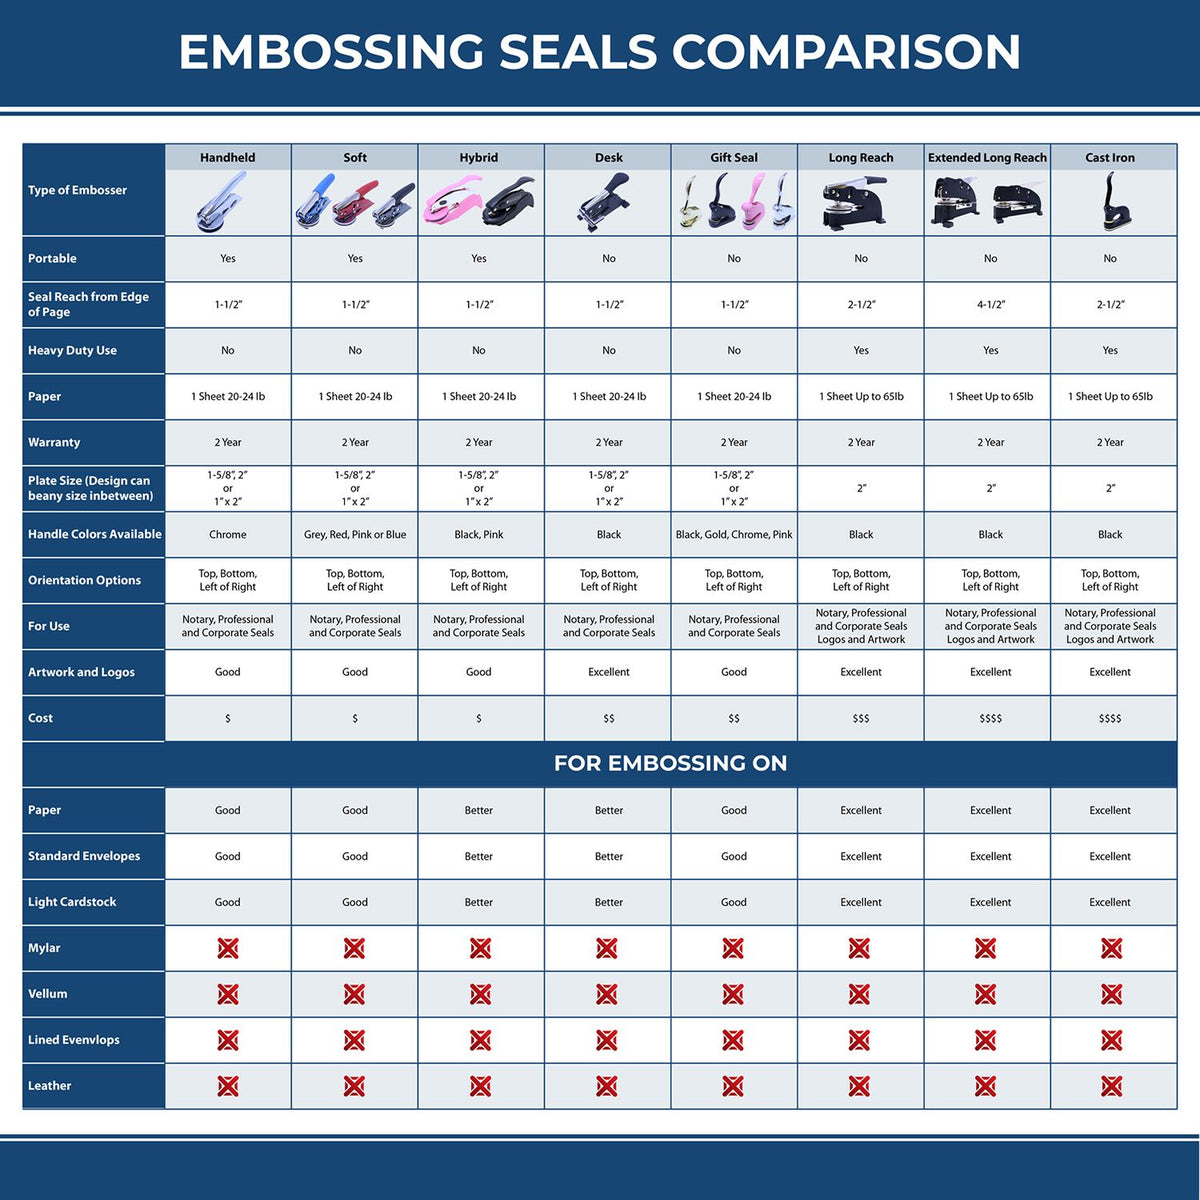 A comparison chart for the different types of mount models available for the Extended Long Reach Pennsylvania Architect Seal Embosser.